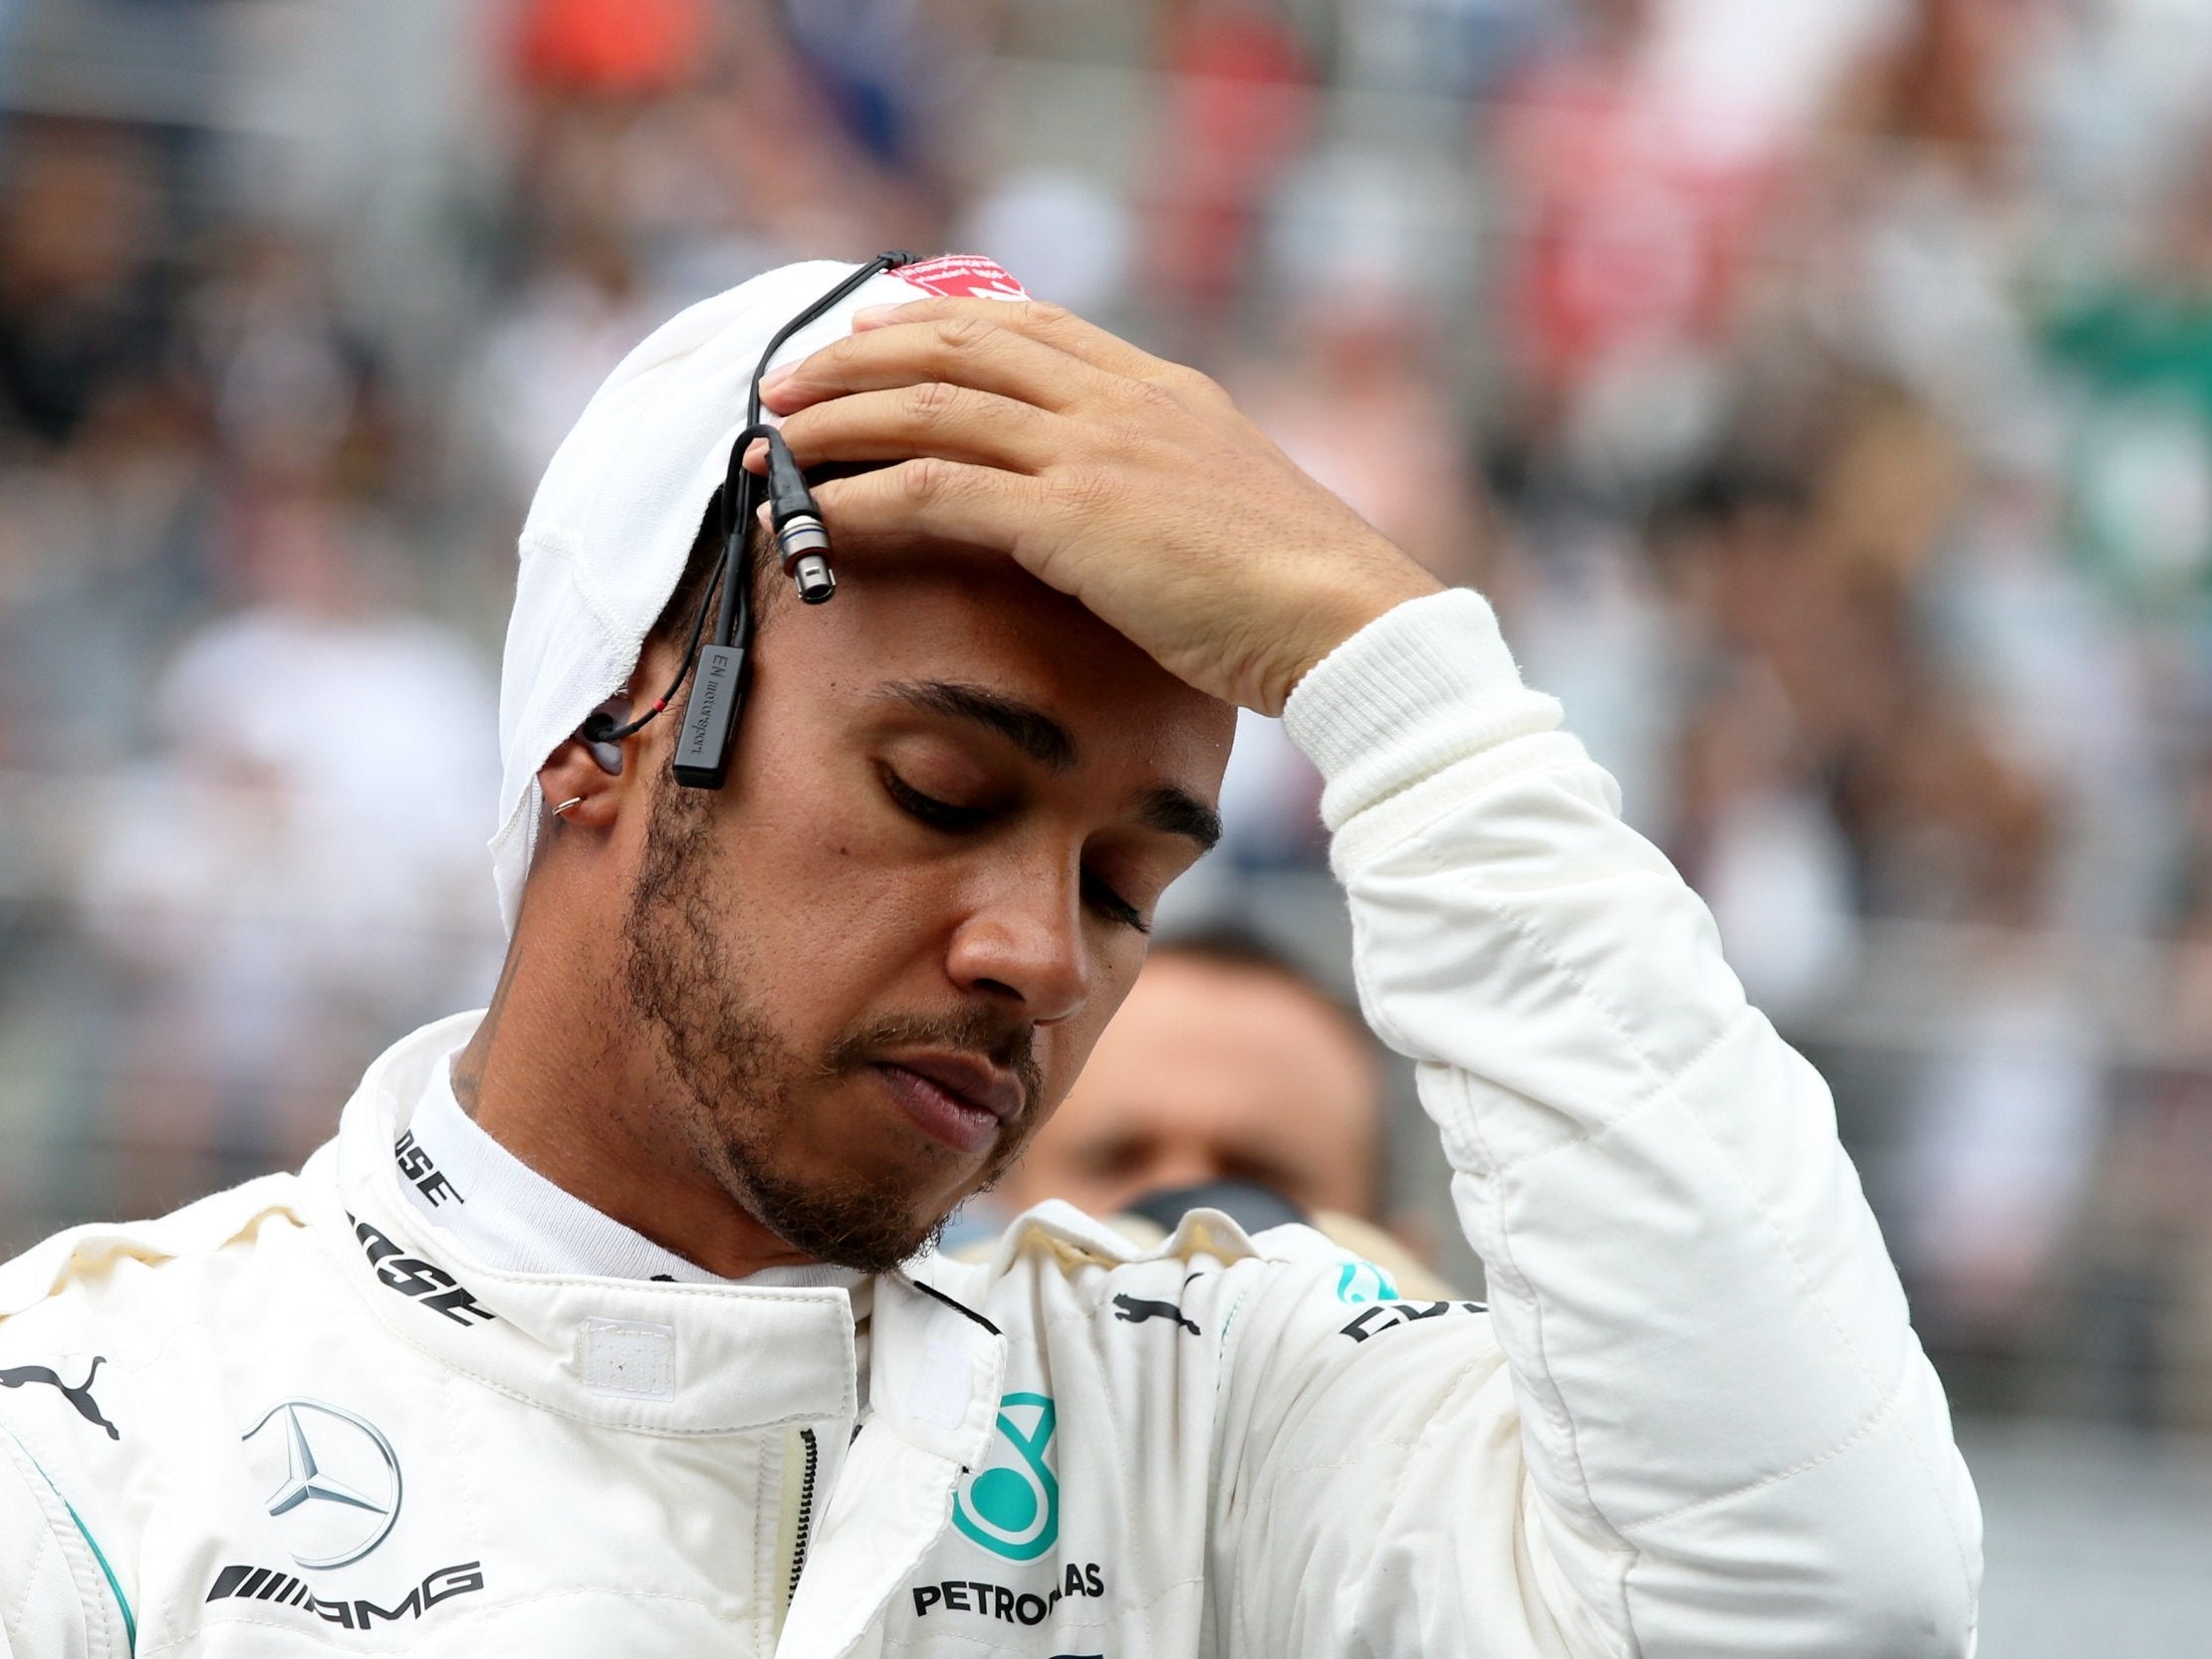 Lewis Hamilton was clearly uneasy with his victory in Russia